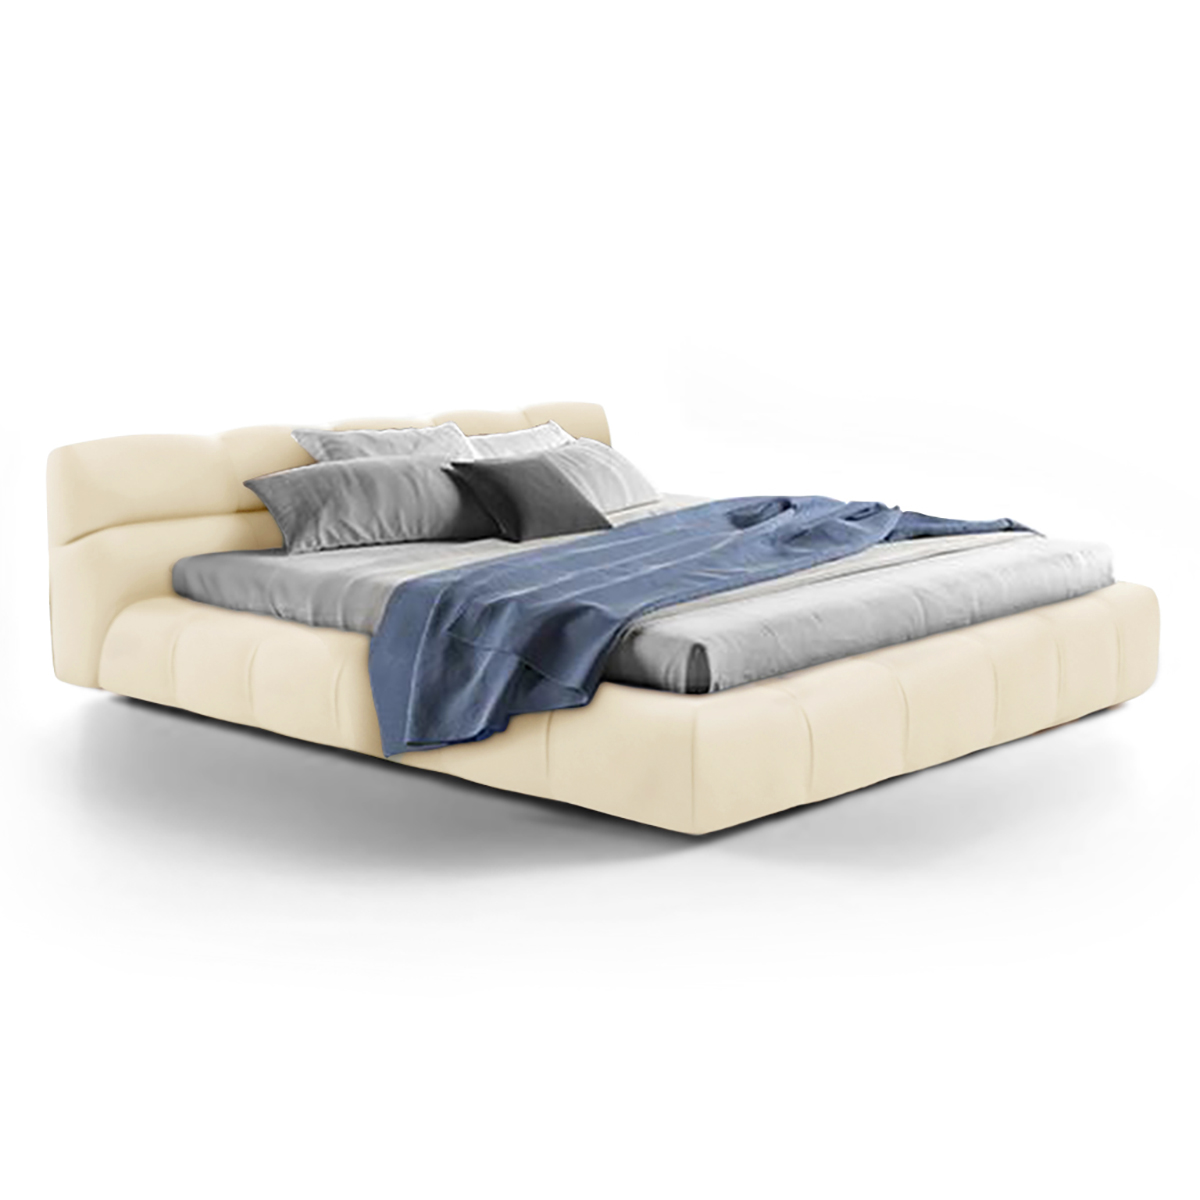 Tufted Bed Aniline Leather-Cream / Queen Size